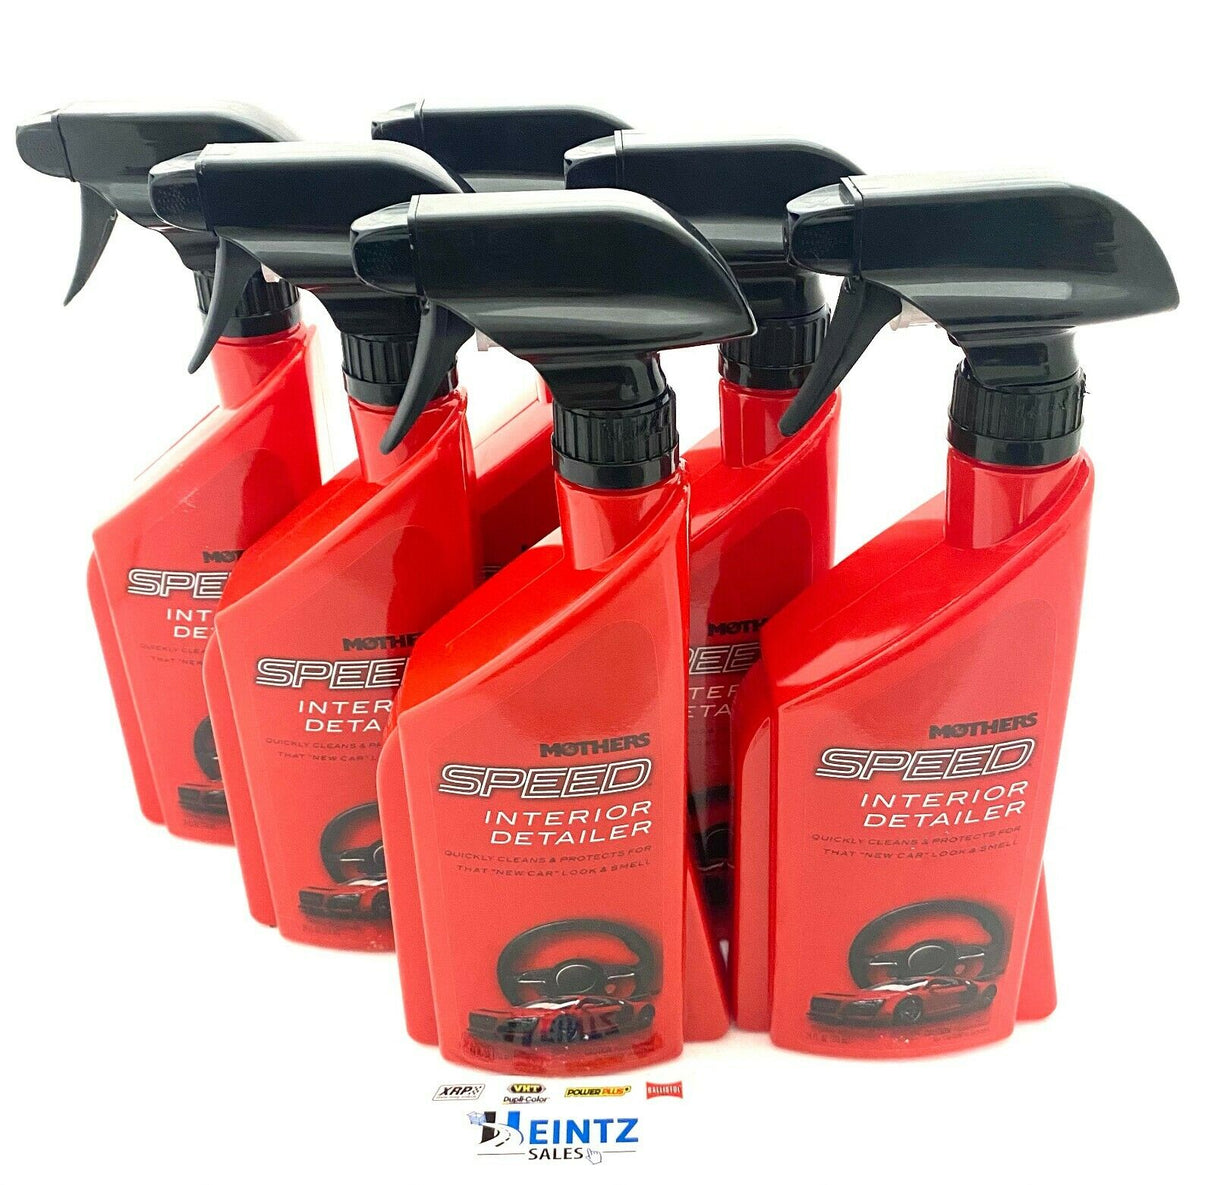 MOTHERS 18324 Speed Interior Detailer 6 PACK - Clean & Protect - Ammonia-Free - 24 oz.